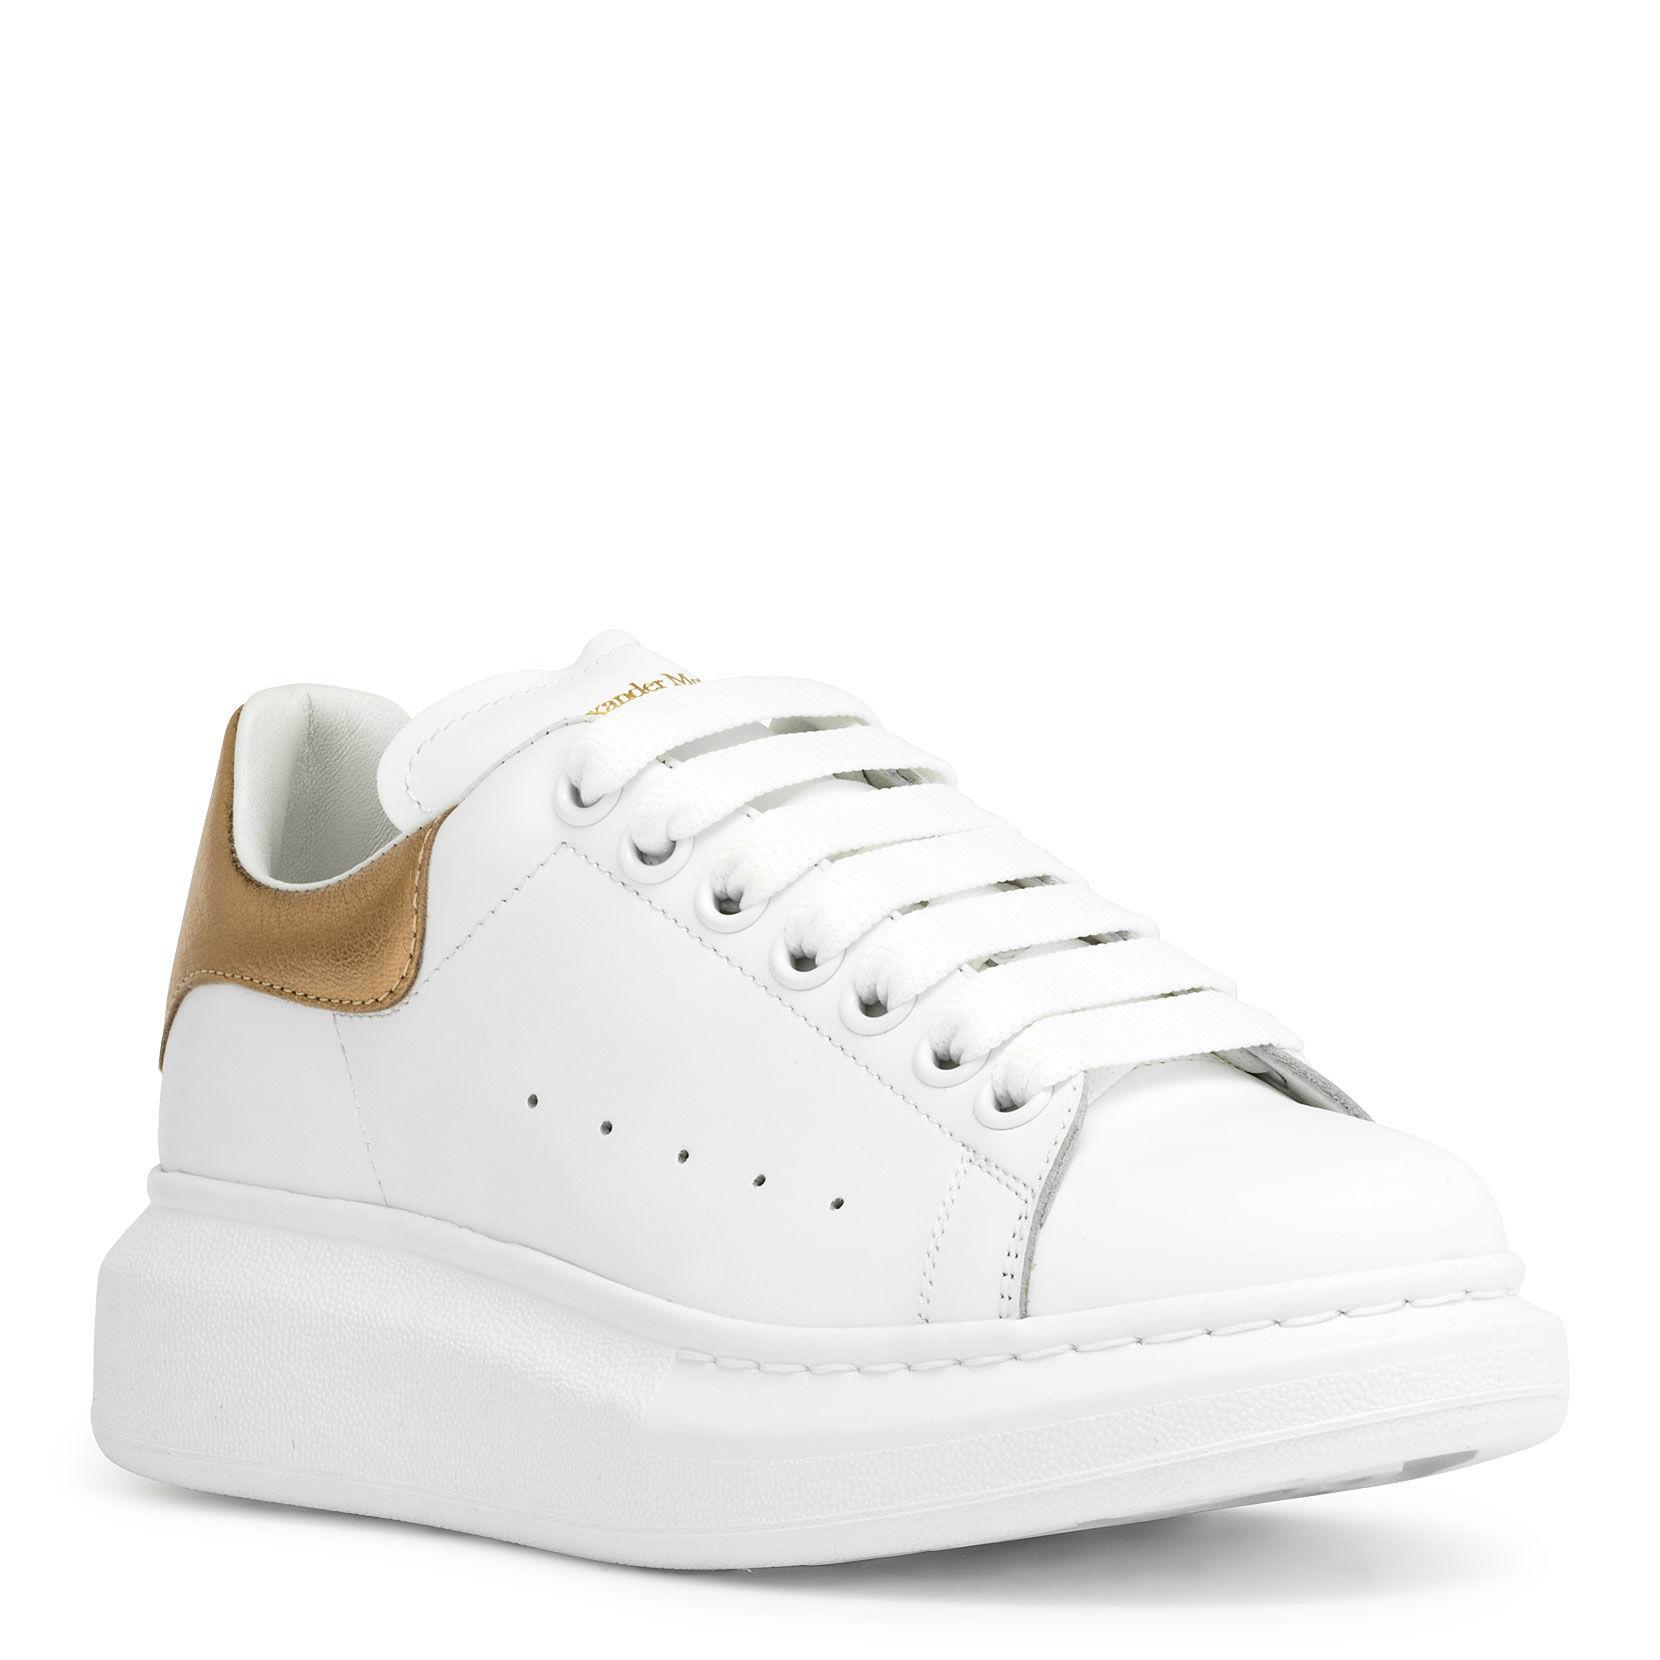 Alexander McQueen White And Gold Classic Sneakers in White - Lyst